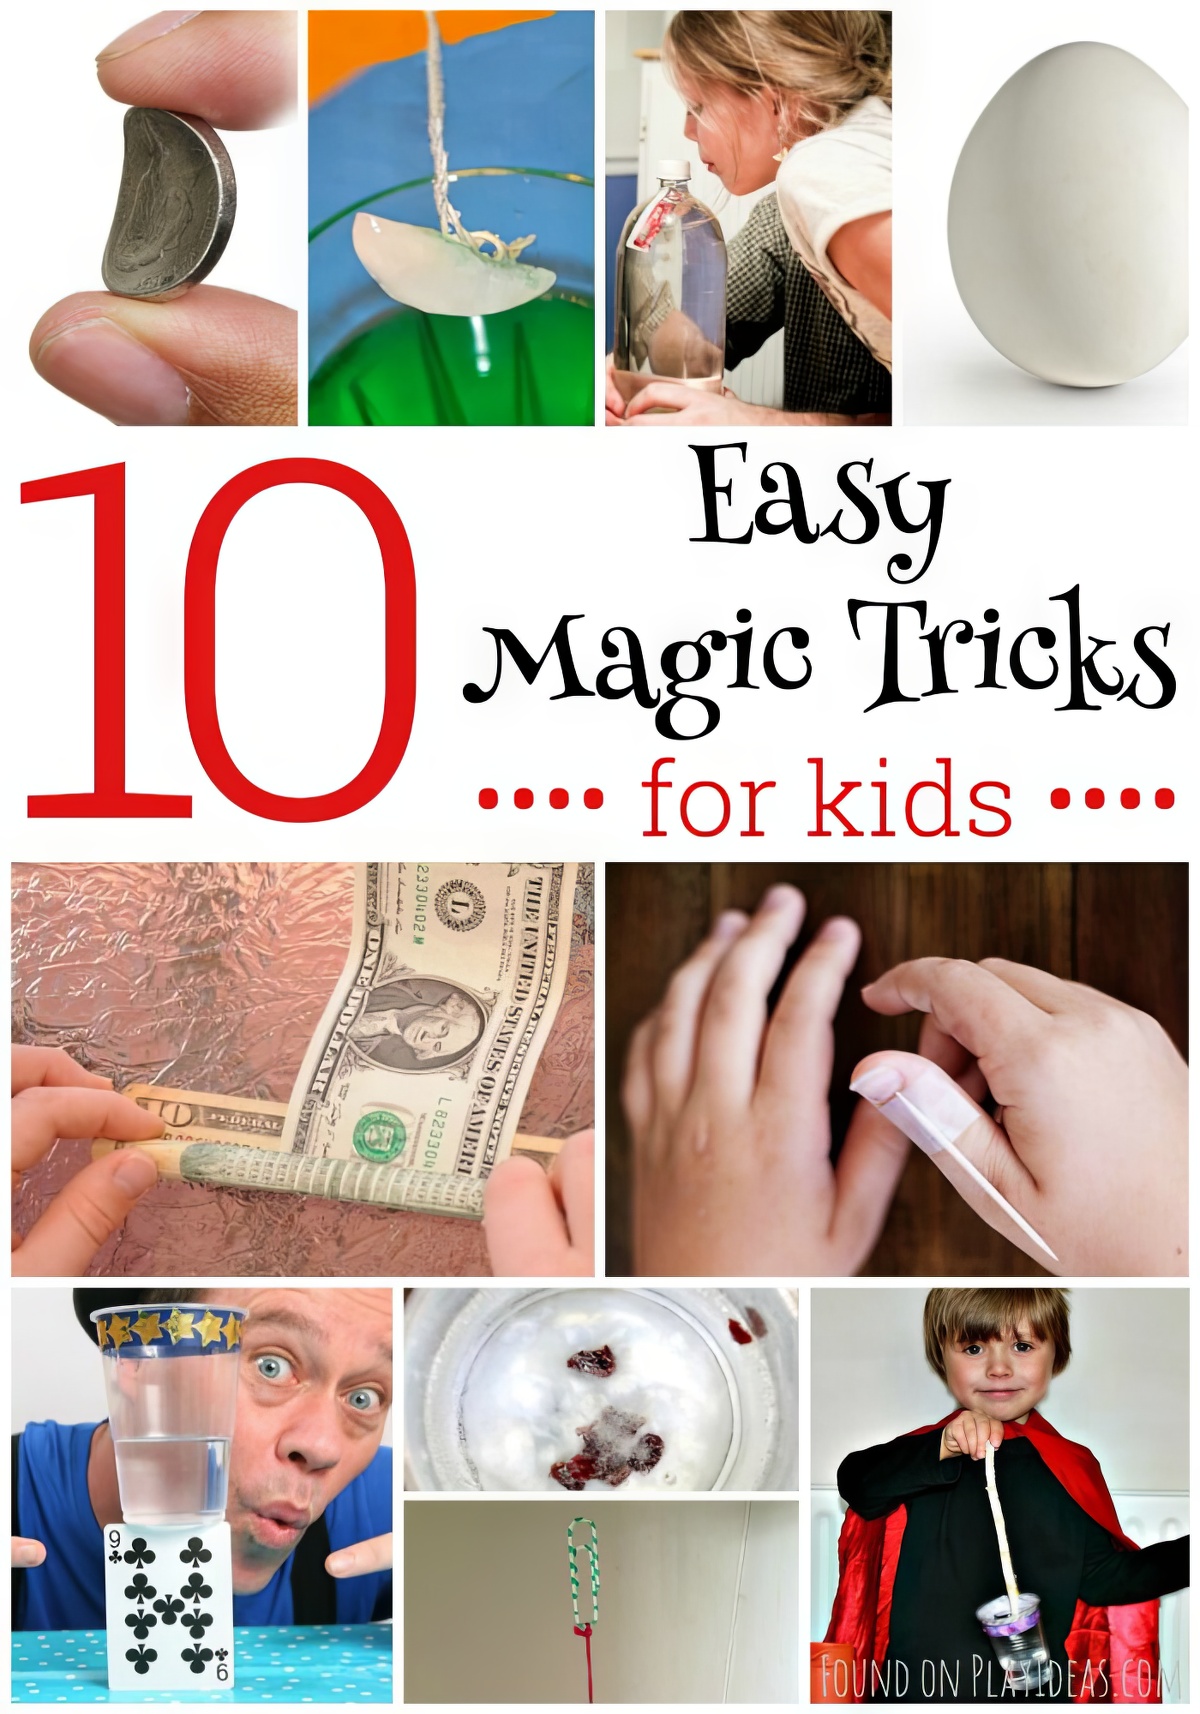 These 10 super easy magic tricks are a sure hit to the kids!